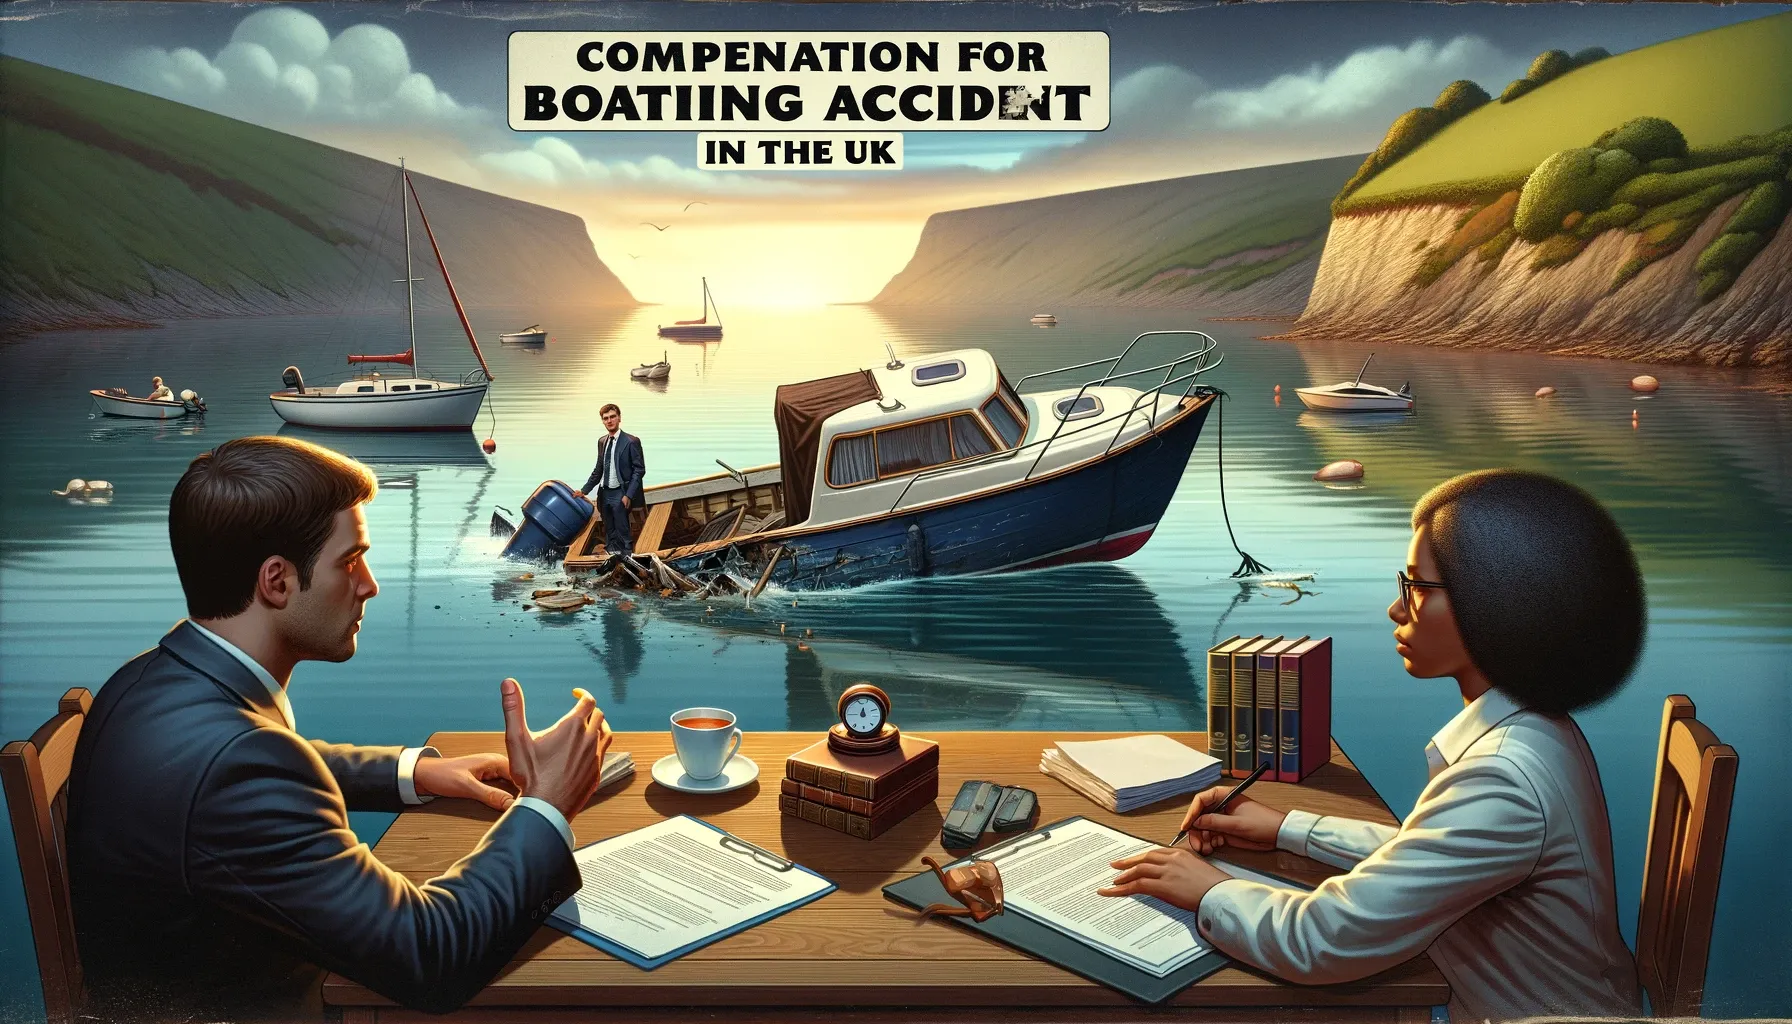 Compensation for Boating Accident can I Claim in the UK